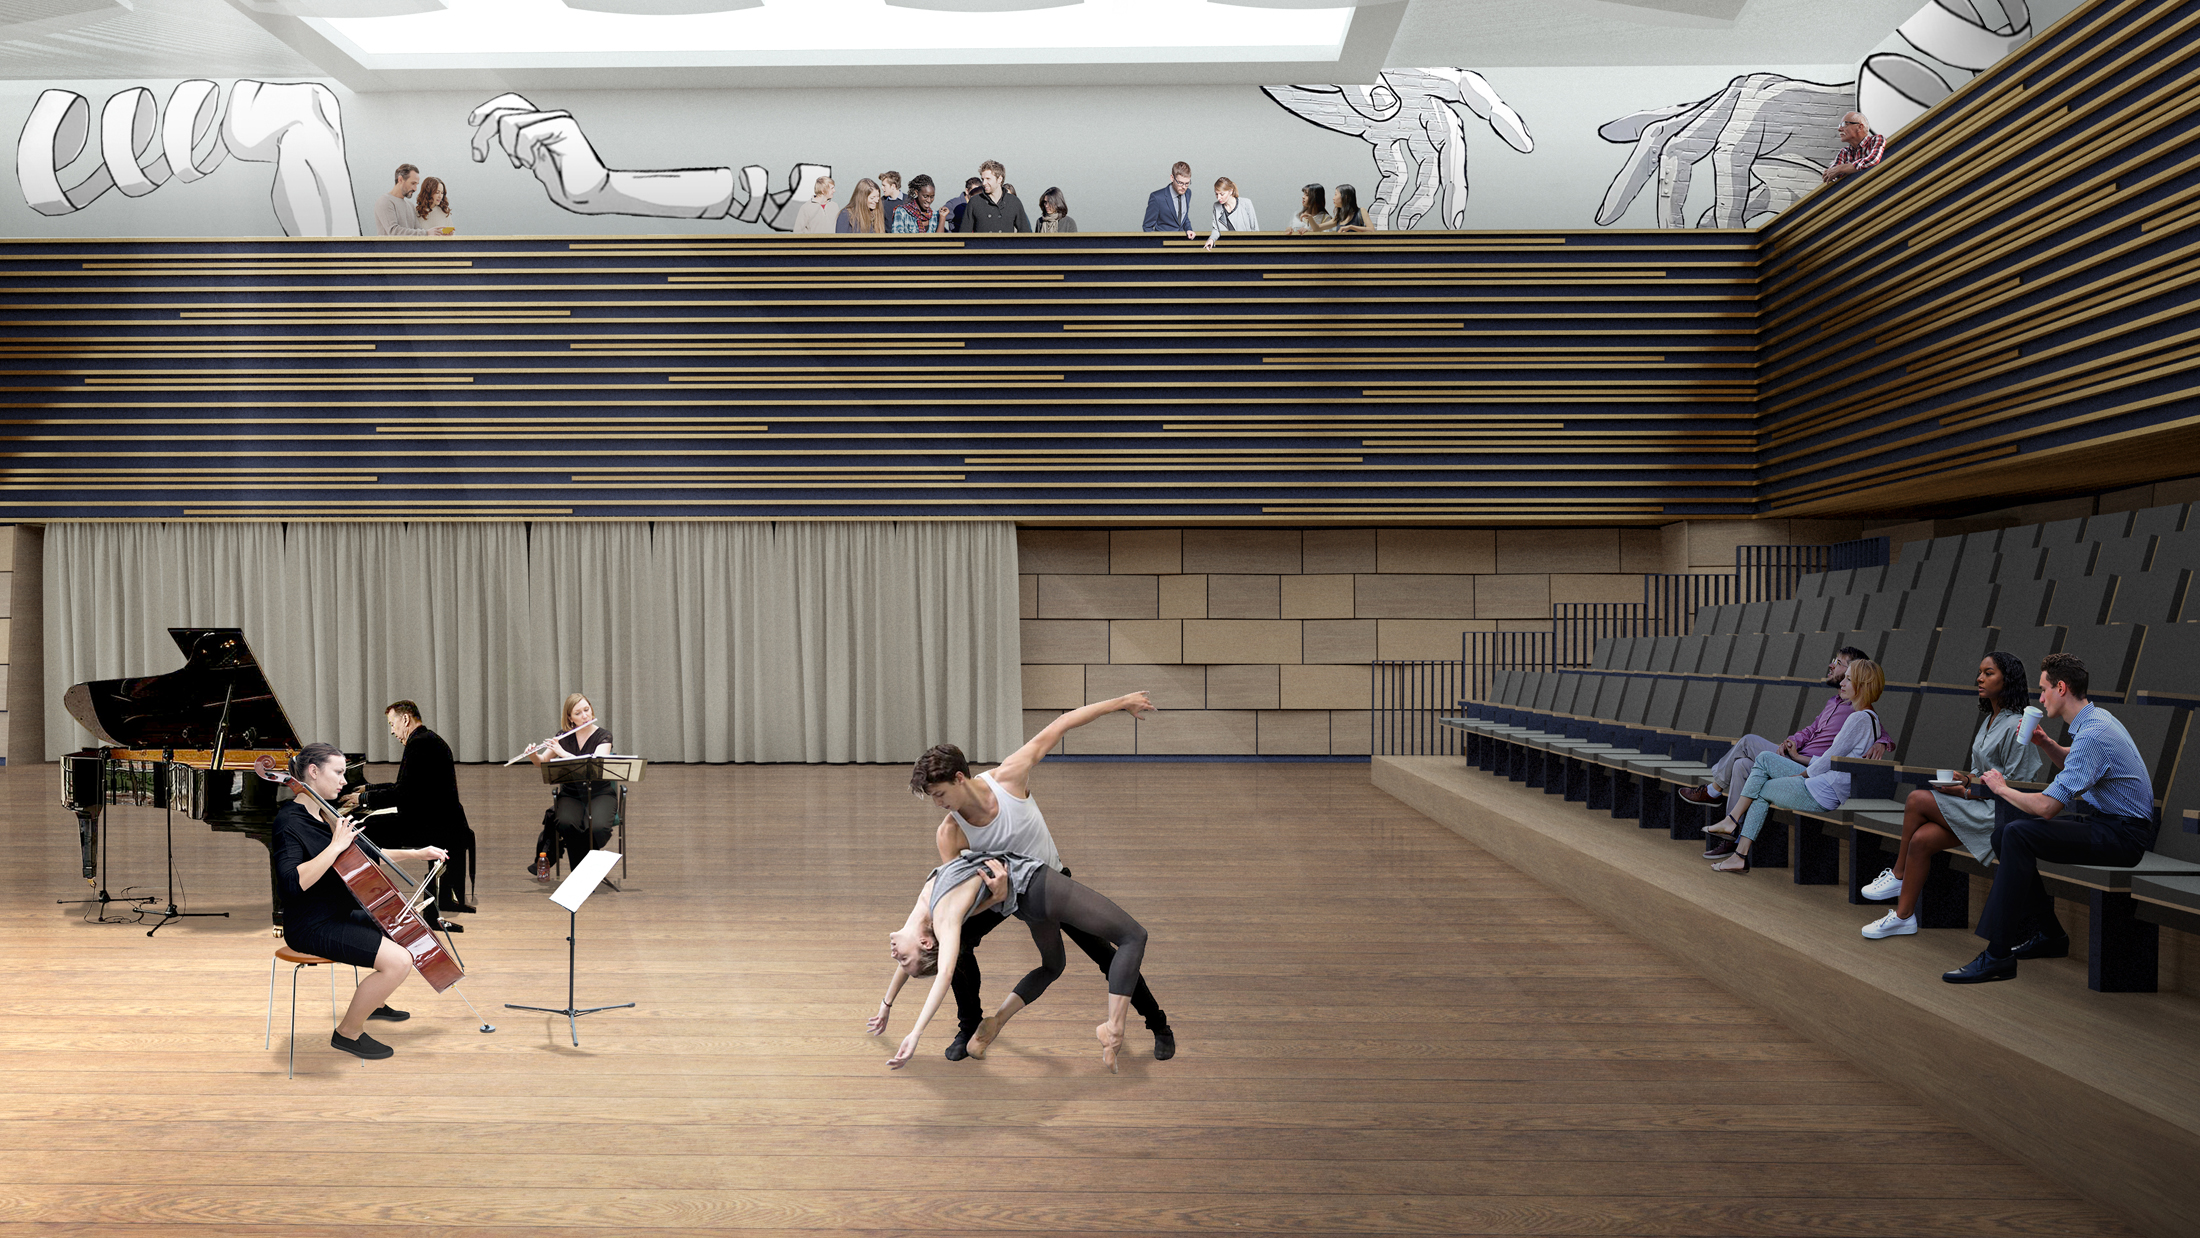 The new performing arts centre Amare, designed by NOAHH and JCAU